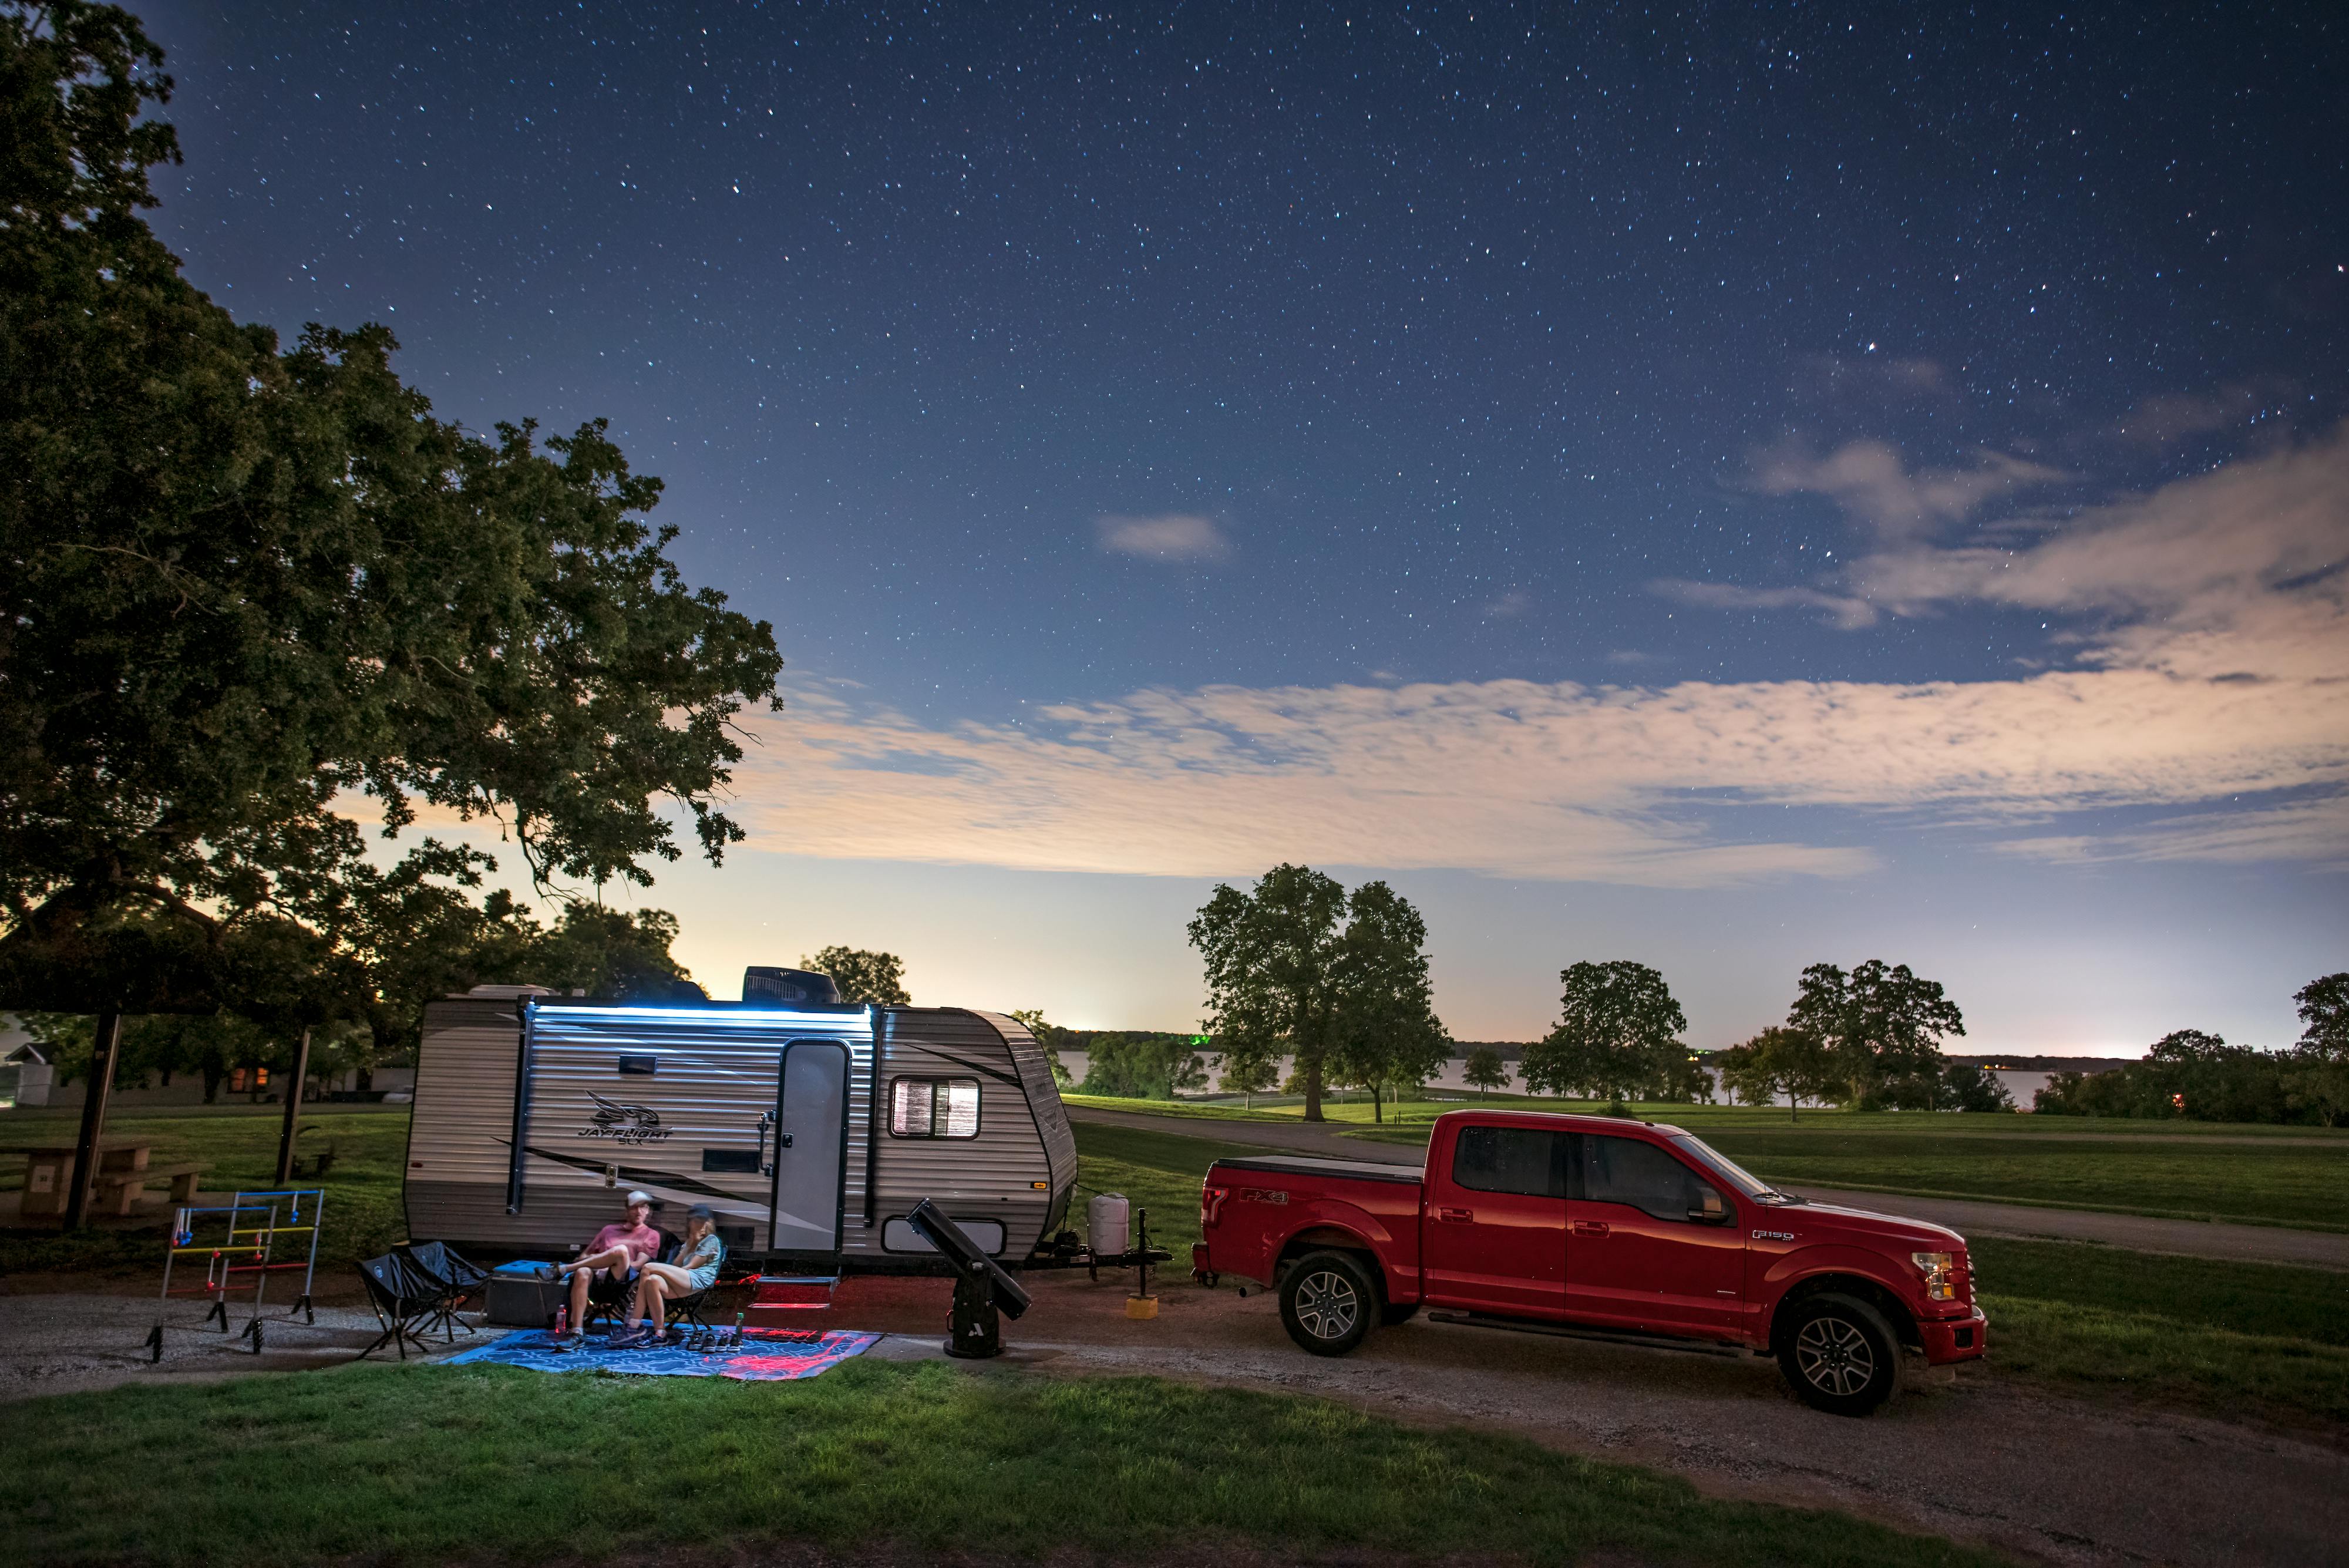 Jason and Alison Takacs at their RV campsite with their truck headlights off